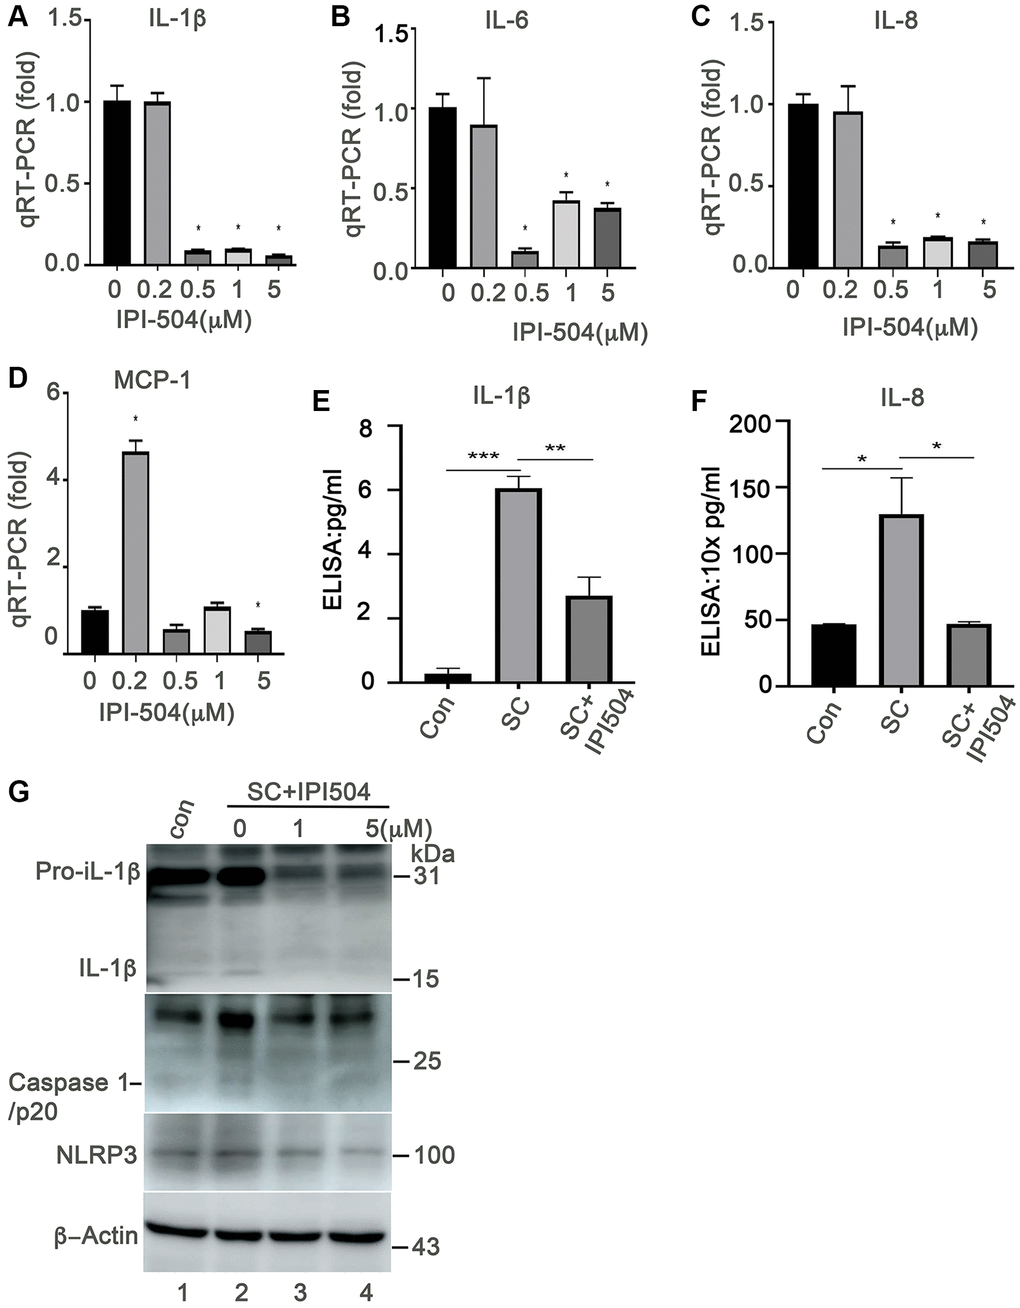 Heat shock protein 90 inhibitor IPI-504 suppresses the expression and secretion of senescence-associated inflammatory factors in senescent ARPE-19. (A–D) quantitative PCR measuring the expression of IL-1β, IL-6, IL-8, MCP-1 in day-4 senescent ARPE cells treated with media containing PBS (0) or IPI-504 at the concentrations of 0.2, 0.5, 1 and 5 μM. (E–F) ELISA assay measuring the secretion of IL-1β and IL-8 in the supernatants of senescent ARPE-19 cells treated with IPI-504. con: proliferative ARPE-19 cells, SC: senescent ARPE-19 cells (day-4), SC+IPI504: Day-4 SC cells were treated with 1 μM IPI-504 for 24 hours. (G) Immunoblot the expression of IL-1β, cleaved caspase 1, NLRP3 and GAPDH in control ARPE-19 cells (lane 1), or day-4 senescent ARPE-19 cells treated with IPI-504 at 0, 1 and 5 μM (lanes 2, 3 and 4). The data in each quantitation figure were collected from four independent experiments (n = 4). The two-tailed unpaired t-test was used for statistical analysis, *p ***p 